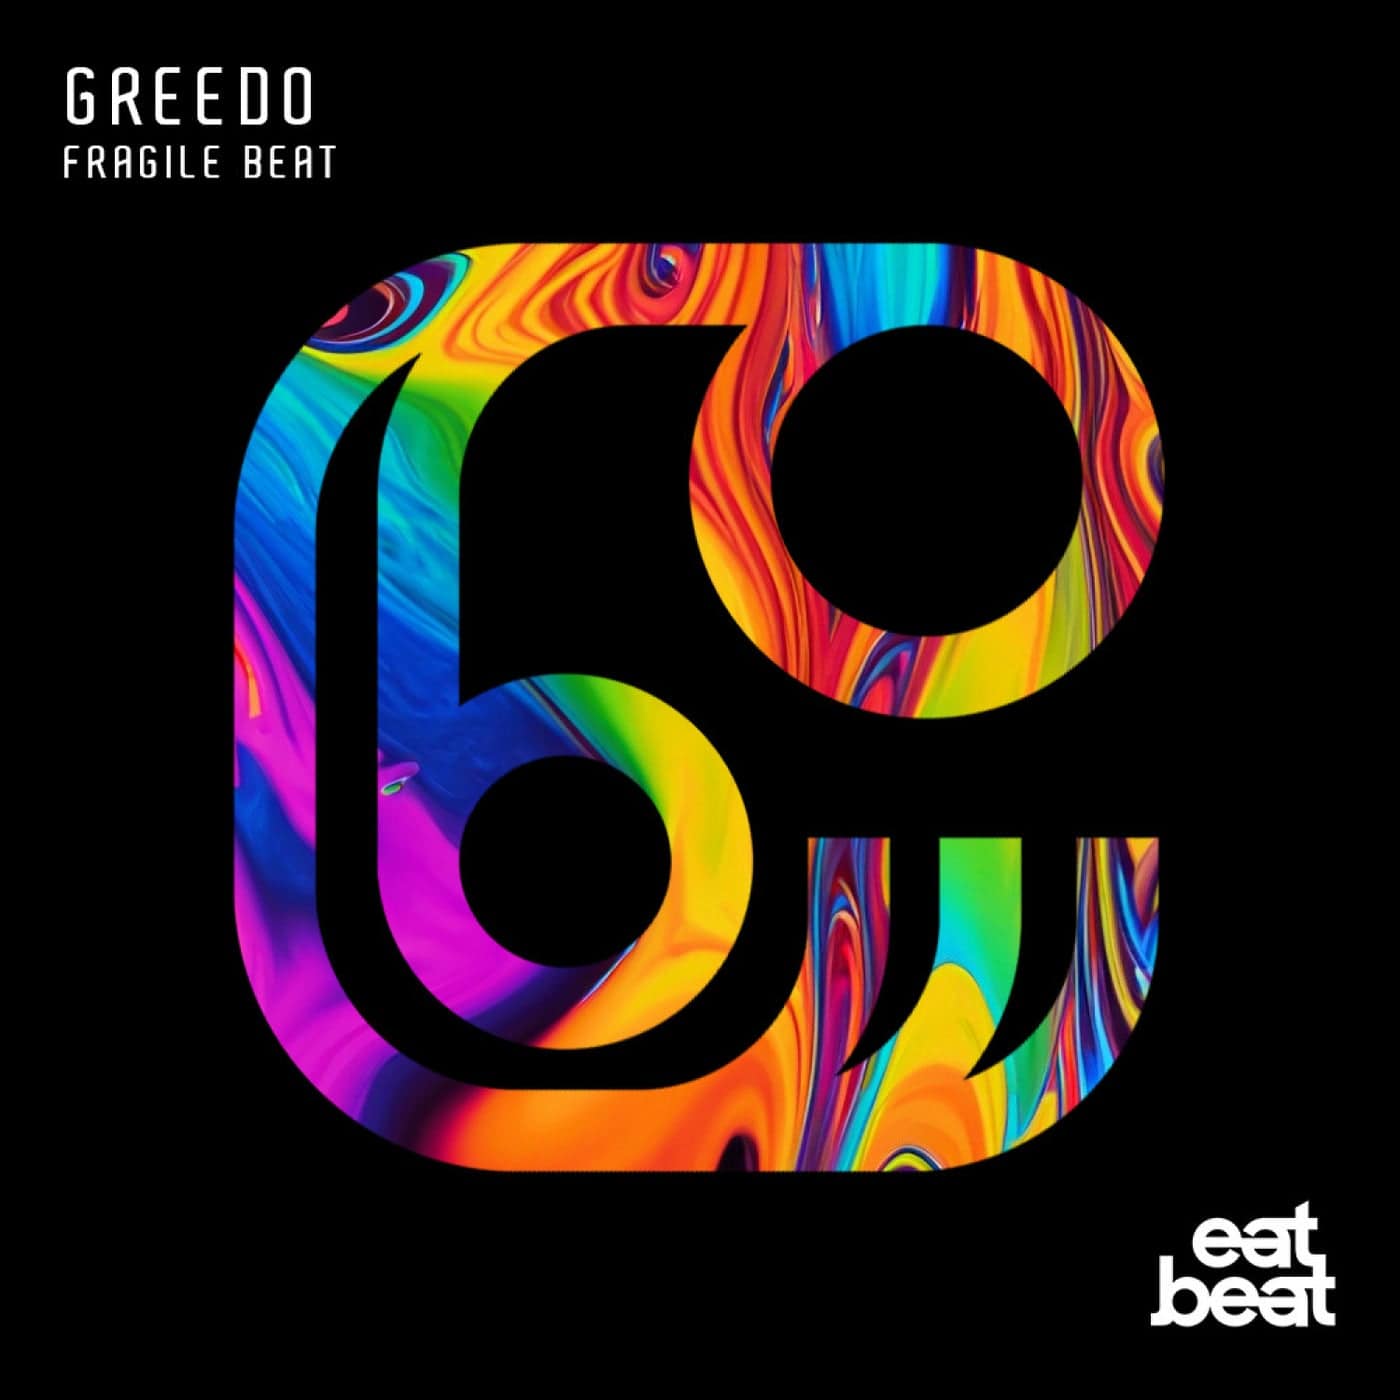 image cover: Fragile Beat by Greedo on Eatbeat Records